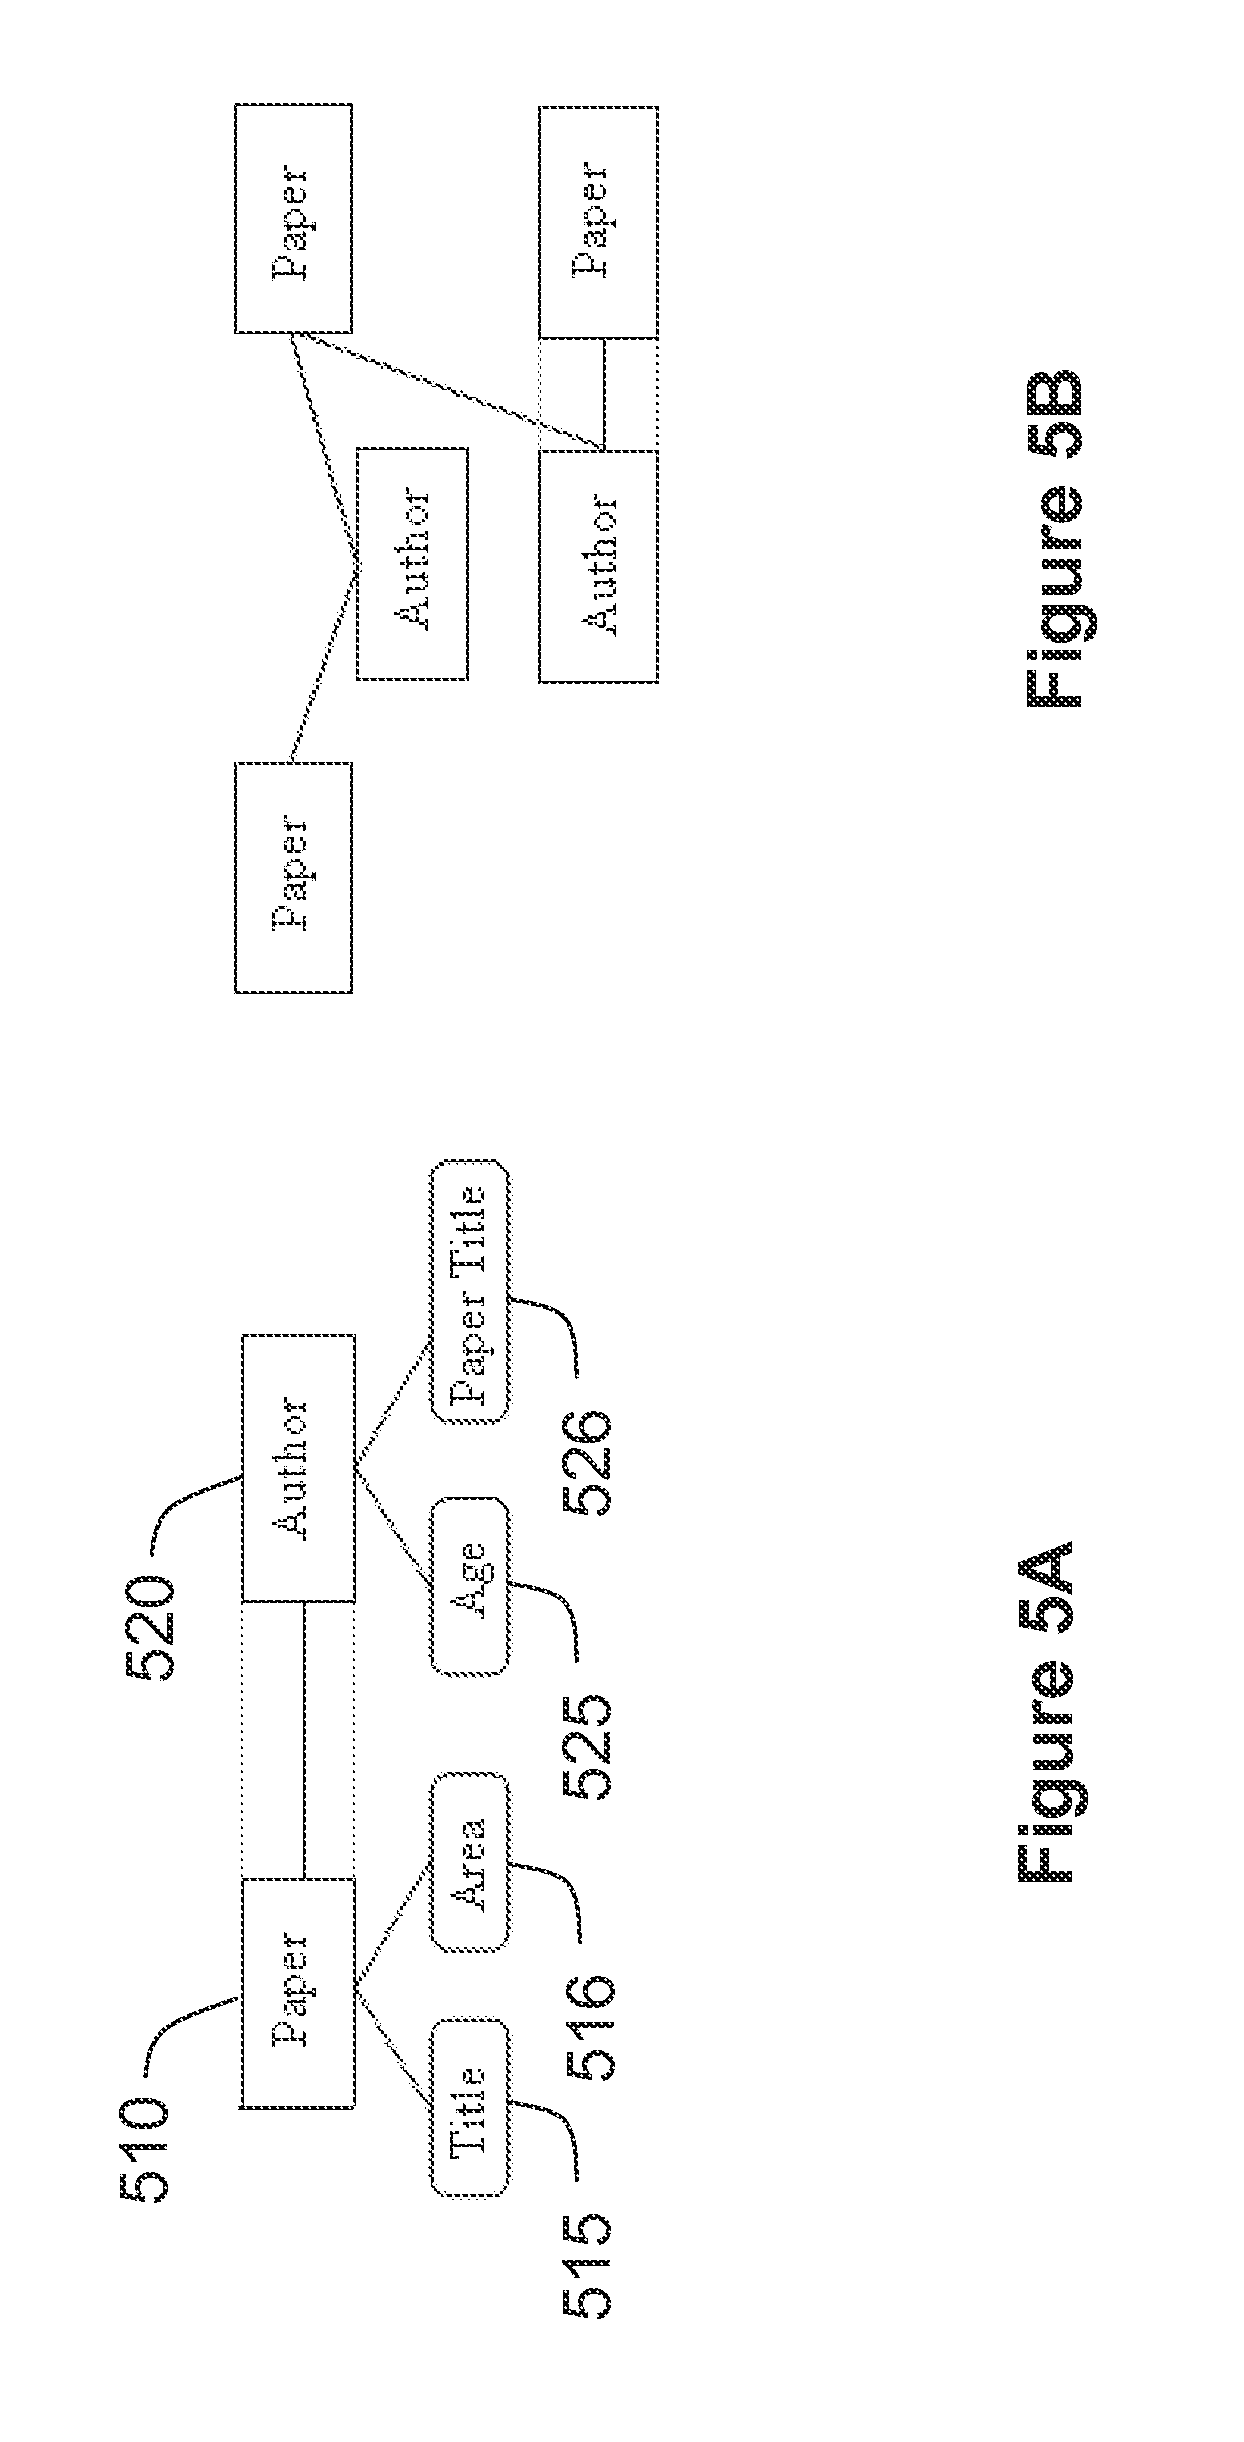 System and method for using graph transduction techniques to make relational classifications on a single connected network